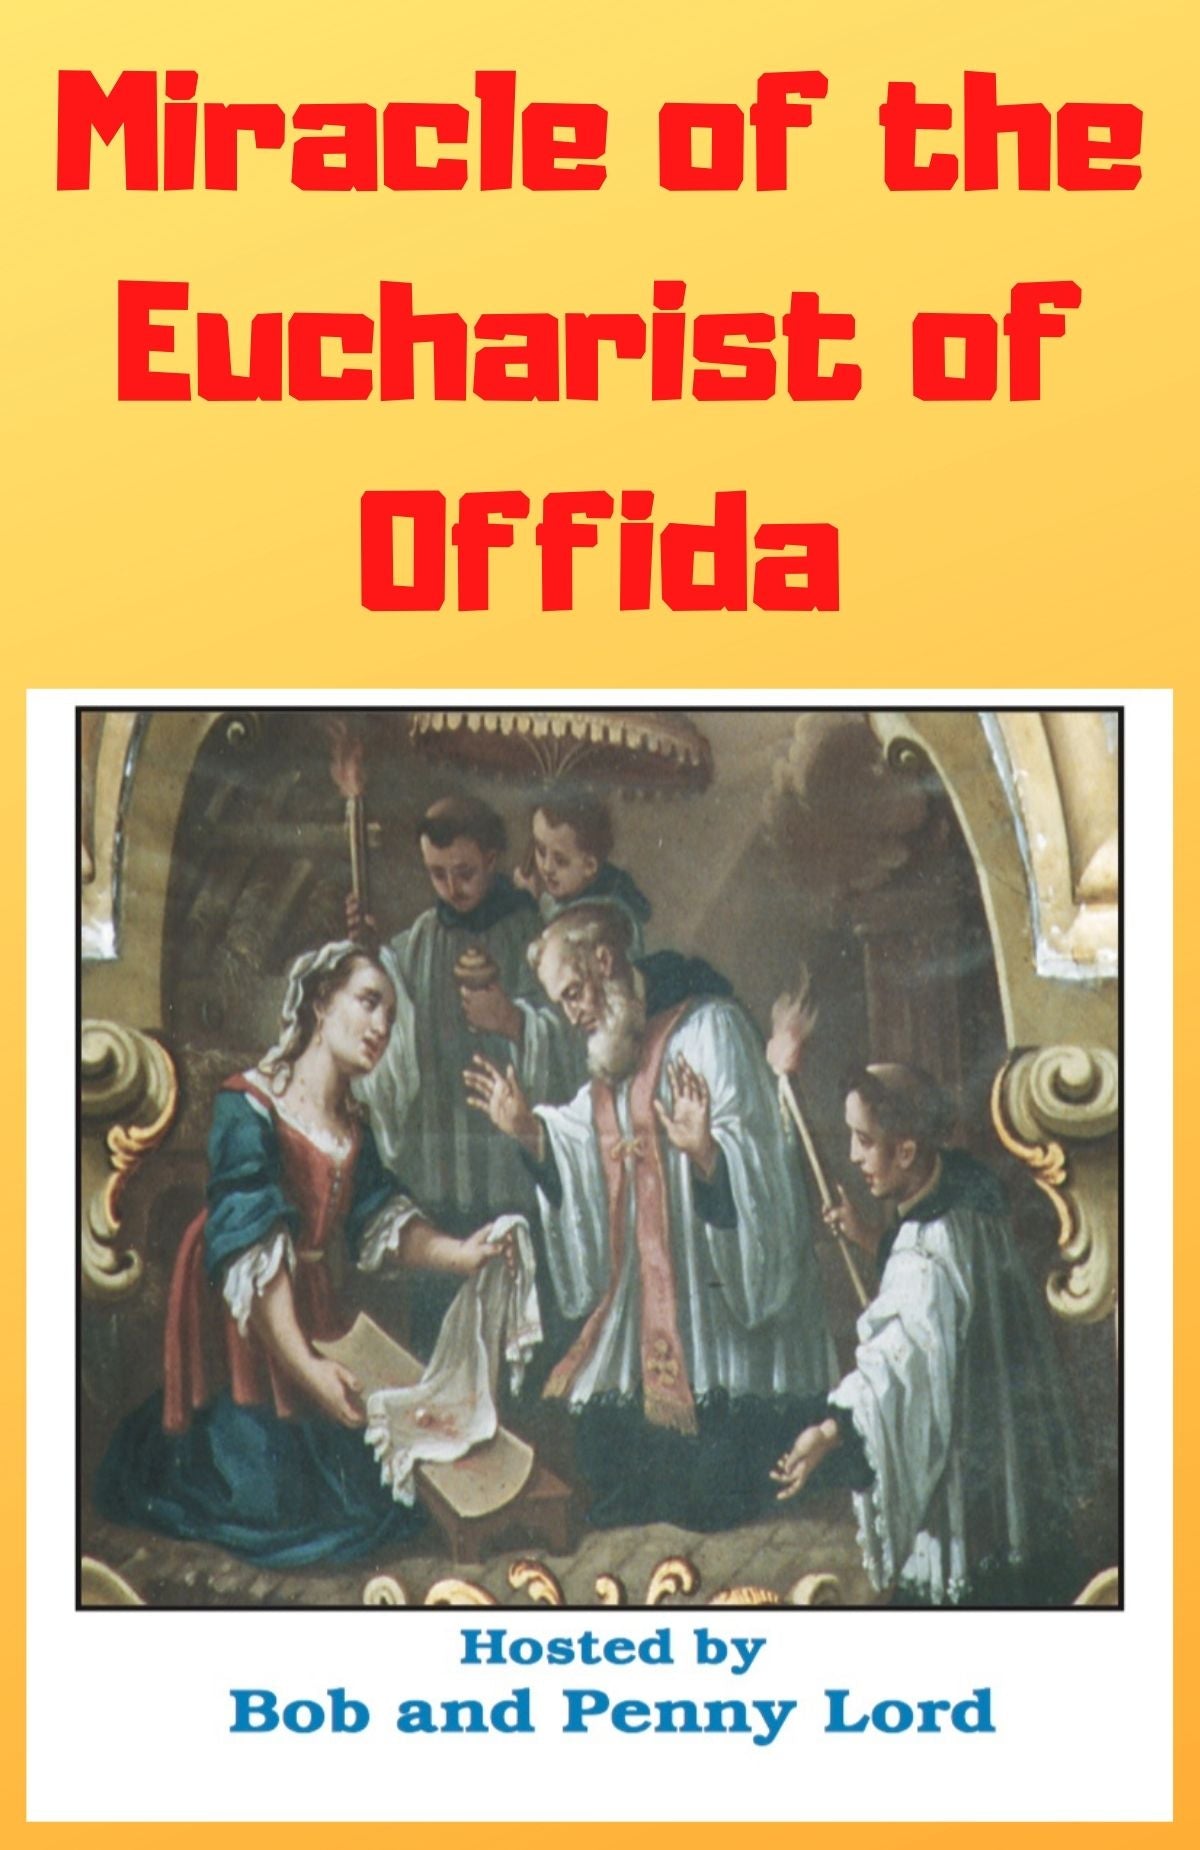 Miracles of the Eucharist Book I - Bob and Penny Lord